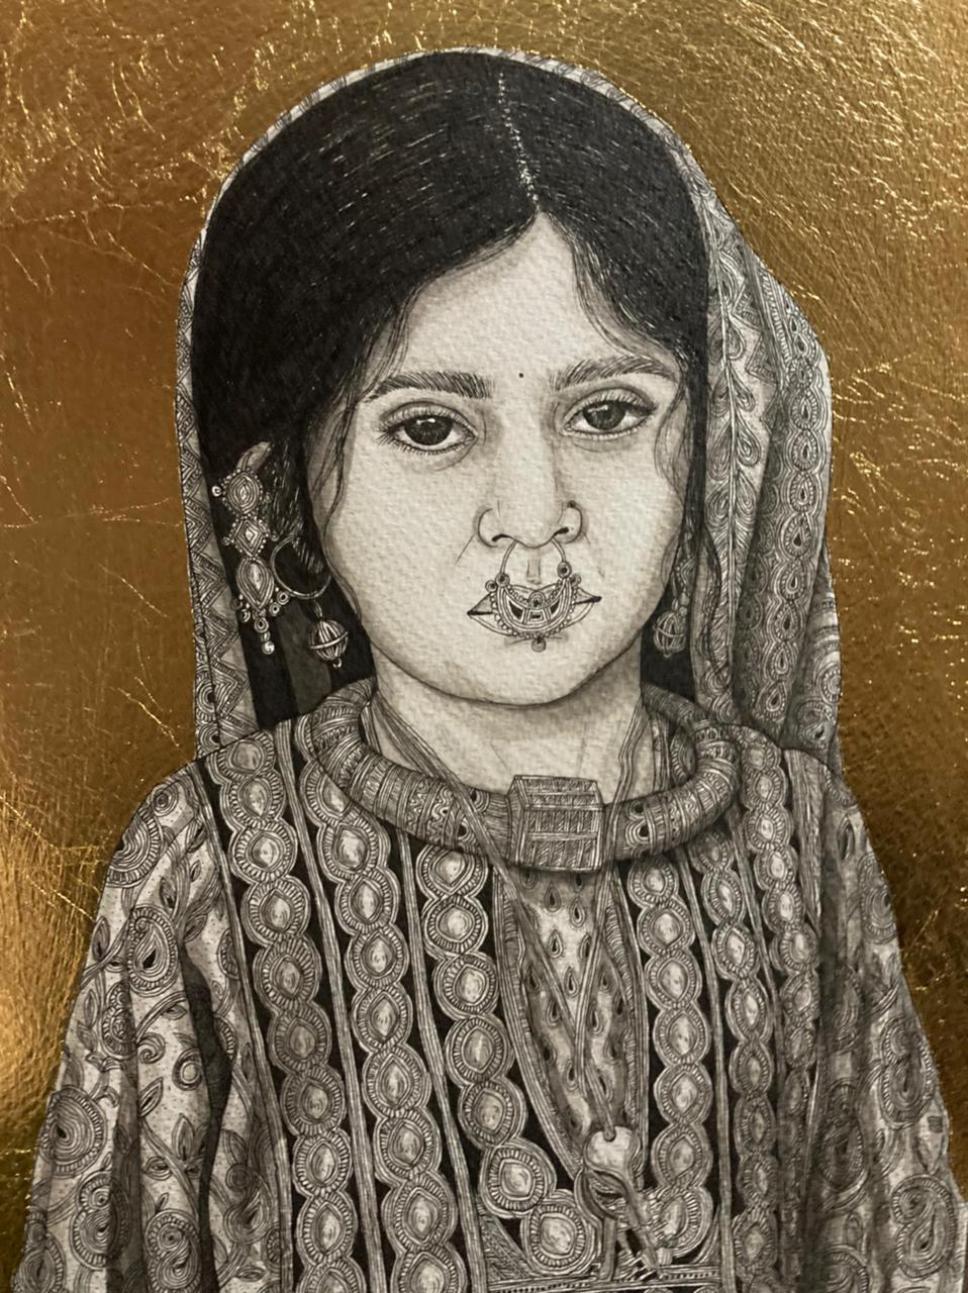 Rajasthani Girl, Ink, Pen, Gold Foil on Paper by Contemporary Artist "In Stock"